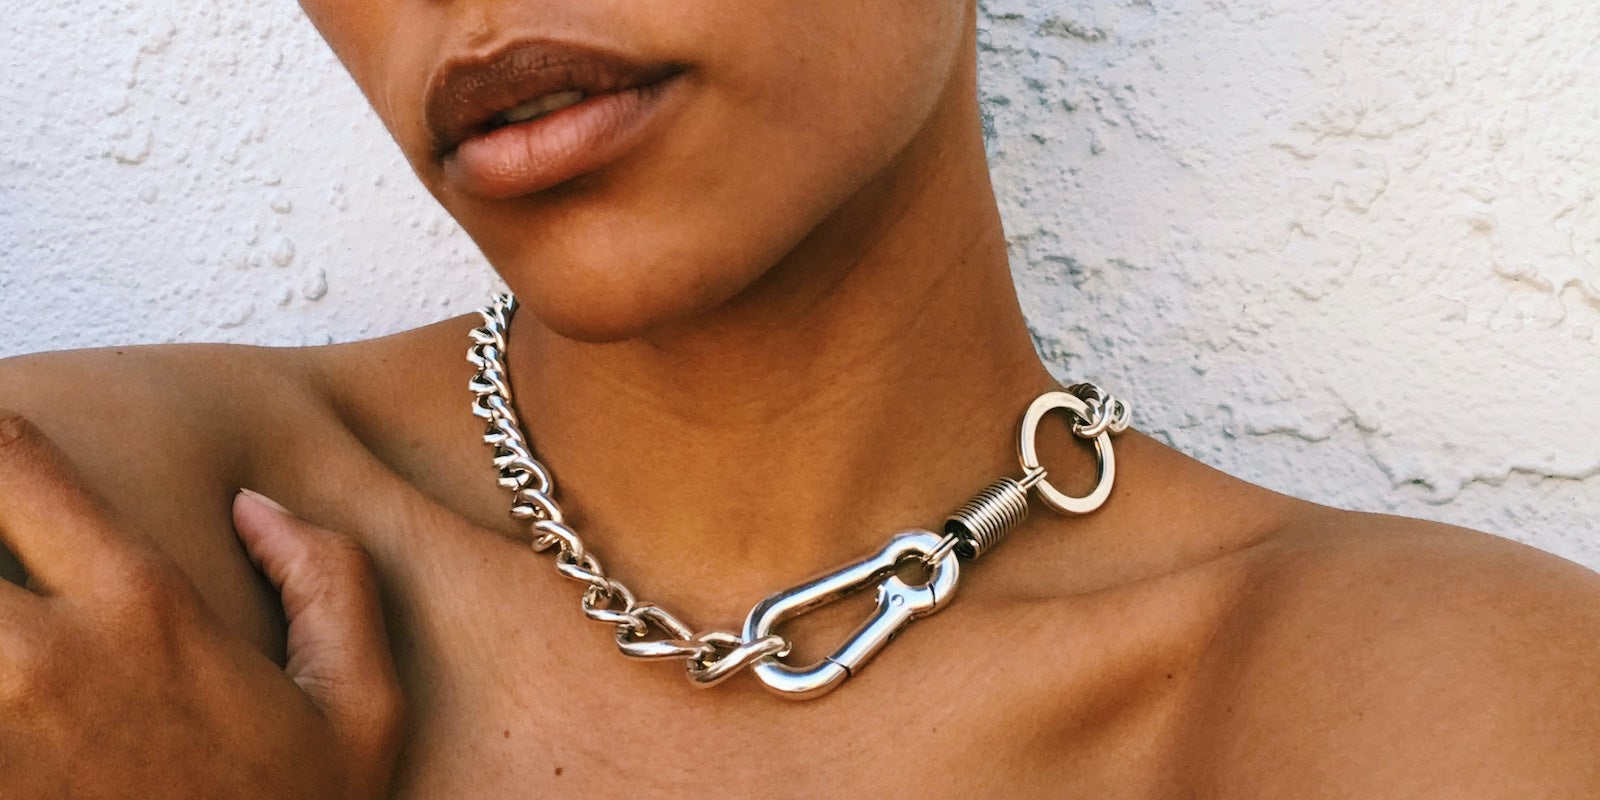 Close up of Courtney wearing a silver chain necklace against a white wall.